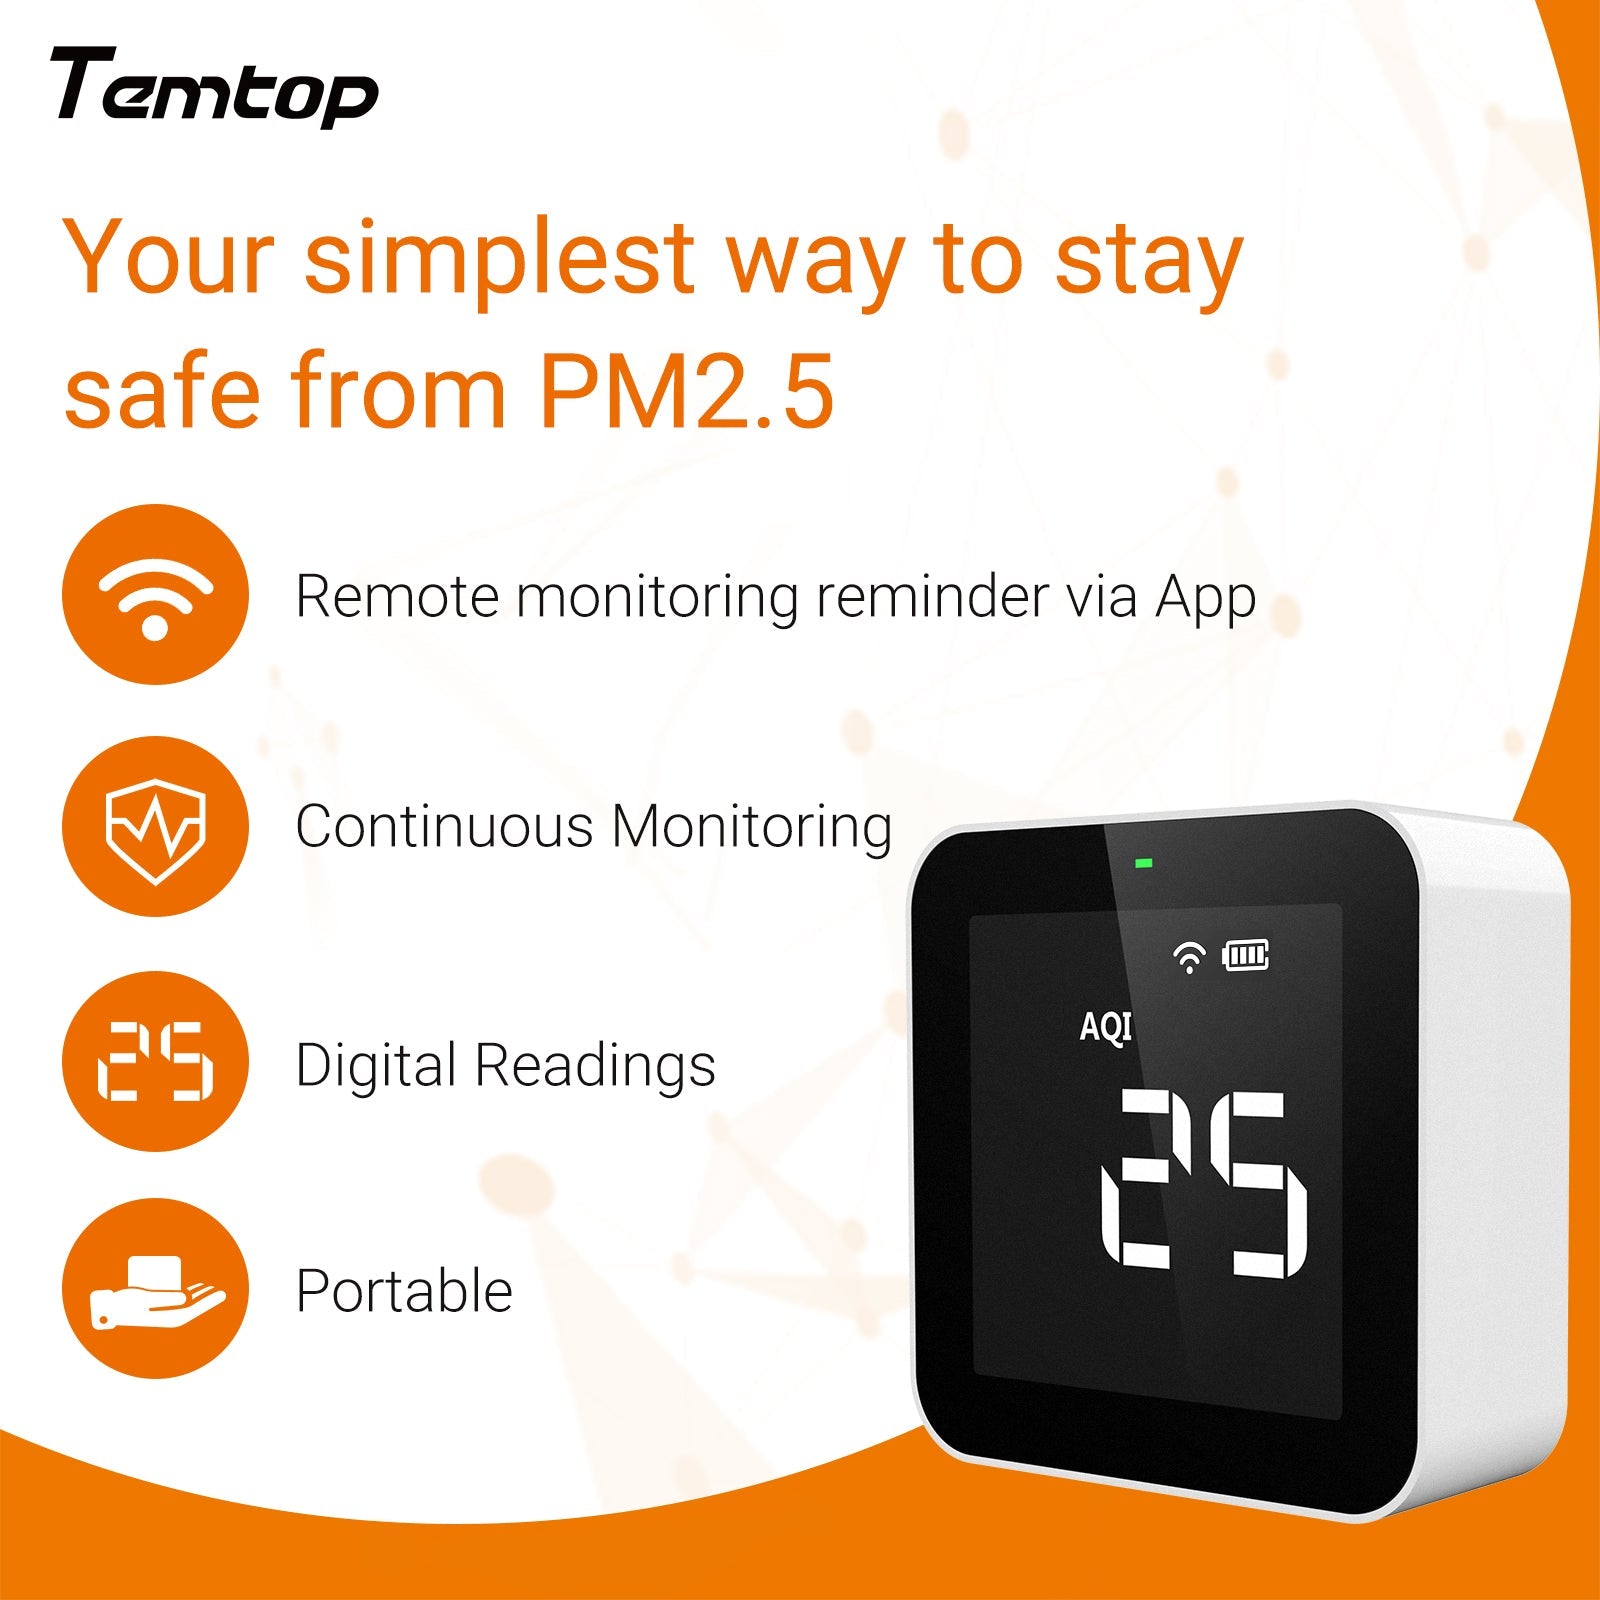 Temtop M10i WiFi Air Quality Monitor for AQI PM2.5 TVOC Formaldehyde with Free Mobile App - Elitech Technology, Inc.